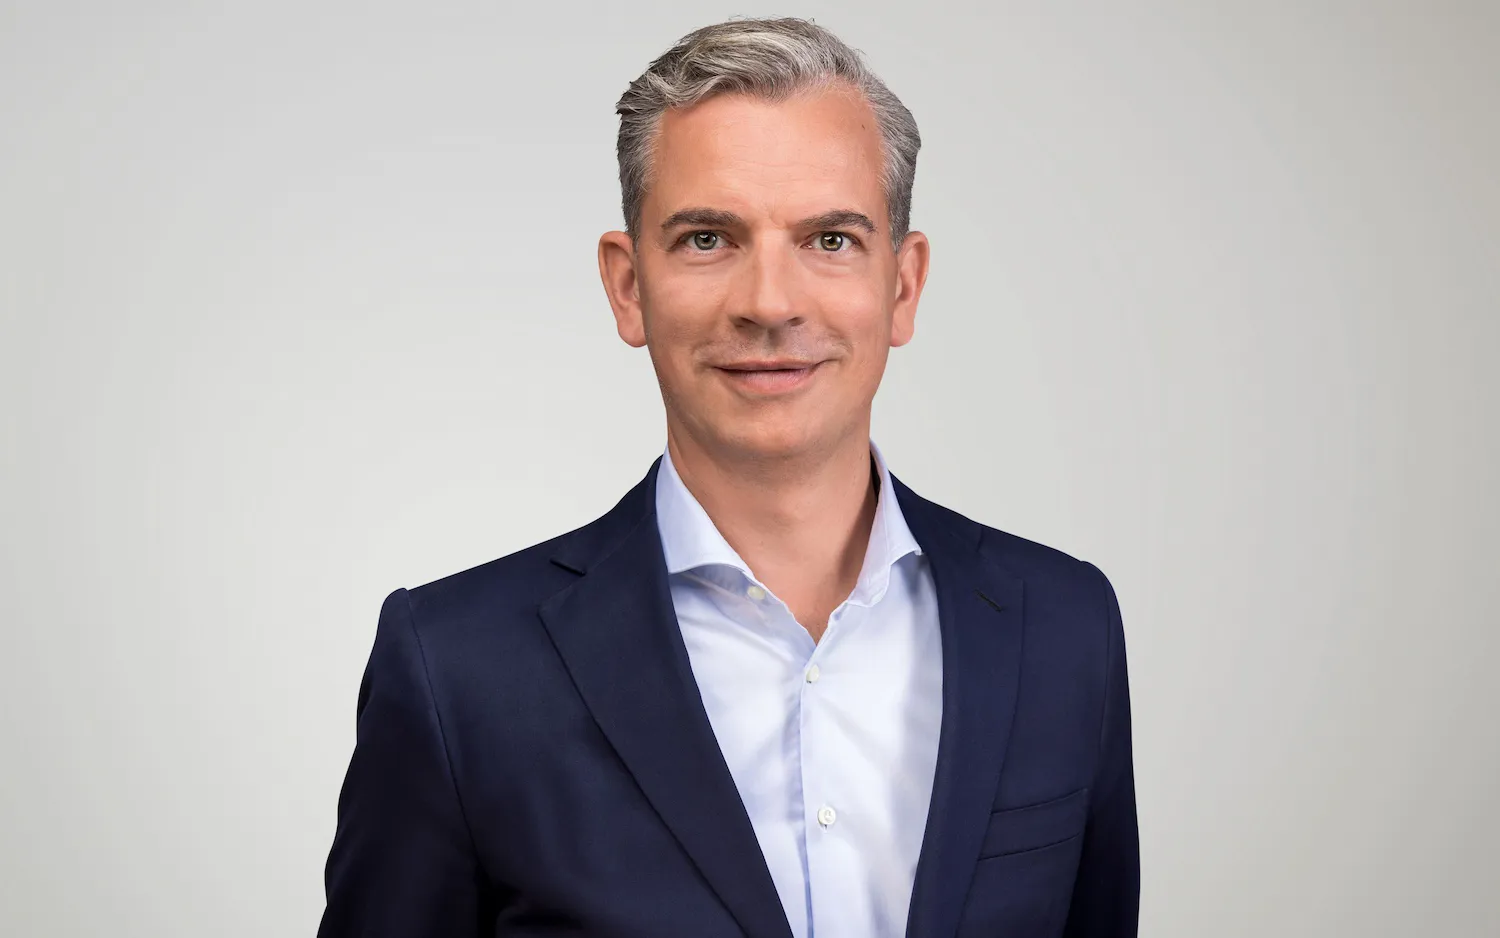 Dr. Matthias Voelkel - Chief Executive Officer